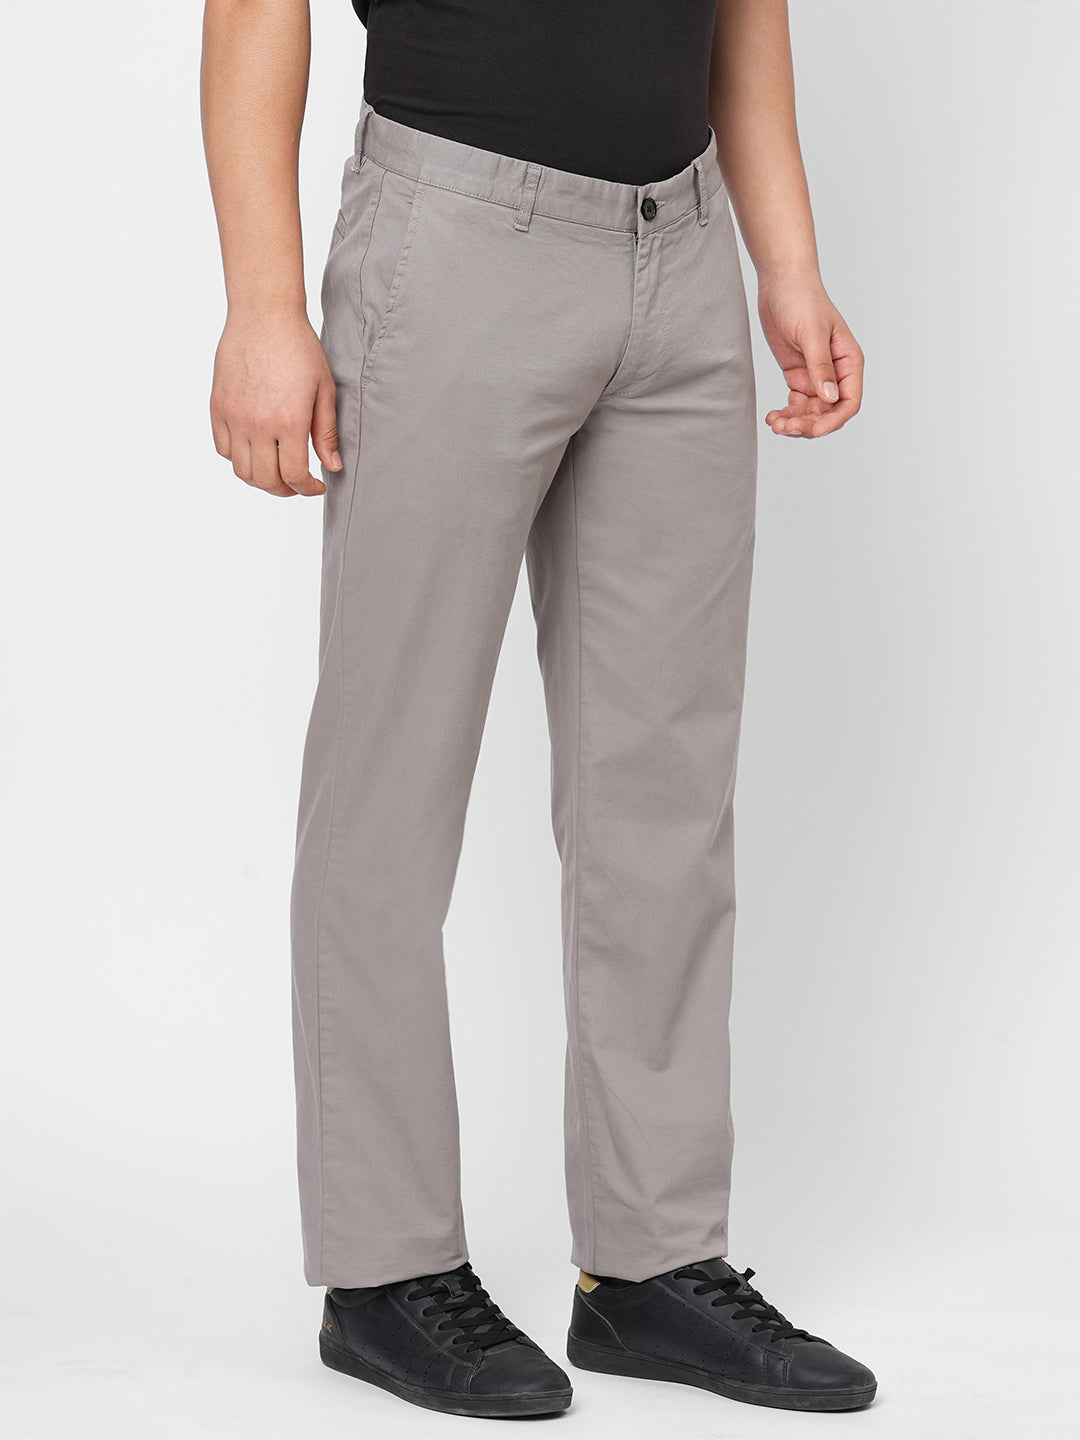 Buy The Slate grey Formal and casual Pant online for men  Beyours  Page 4